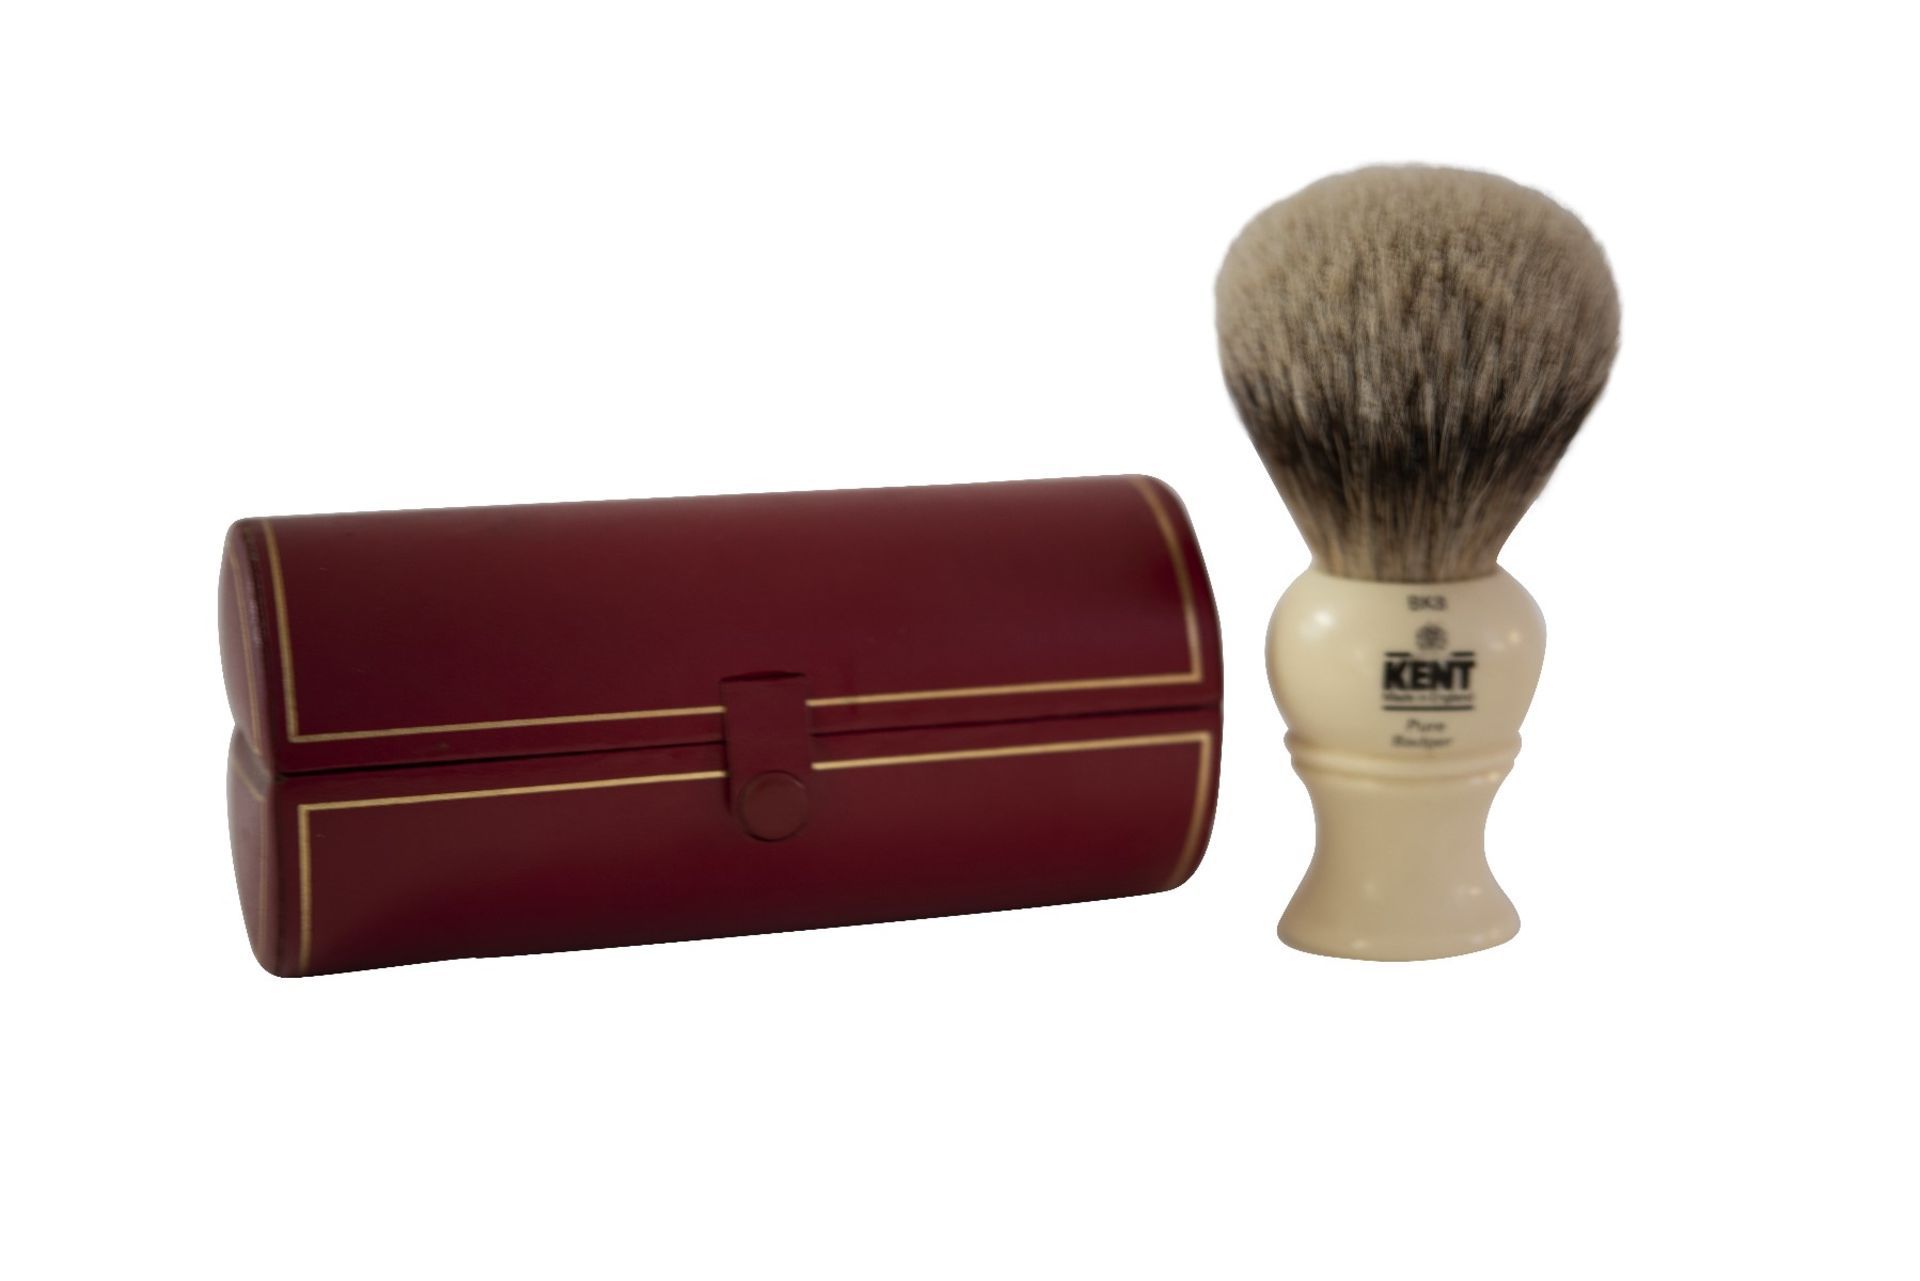 Kent shaving brush together with case - Image 4 of 4